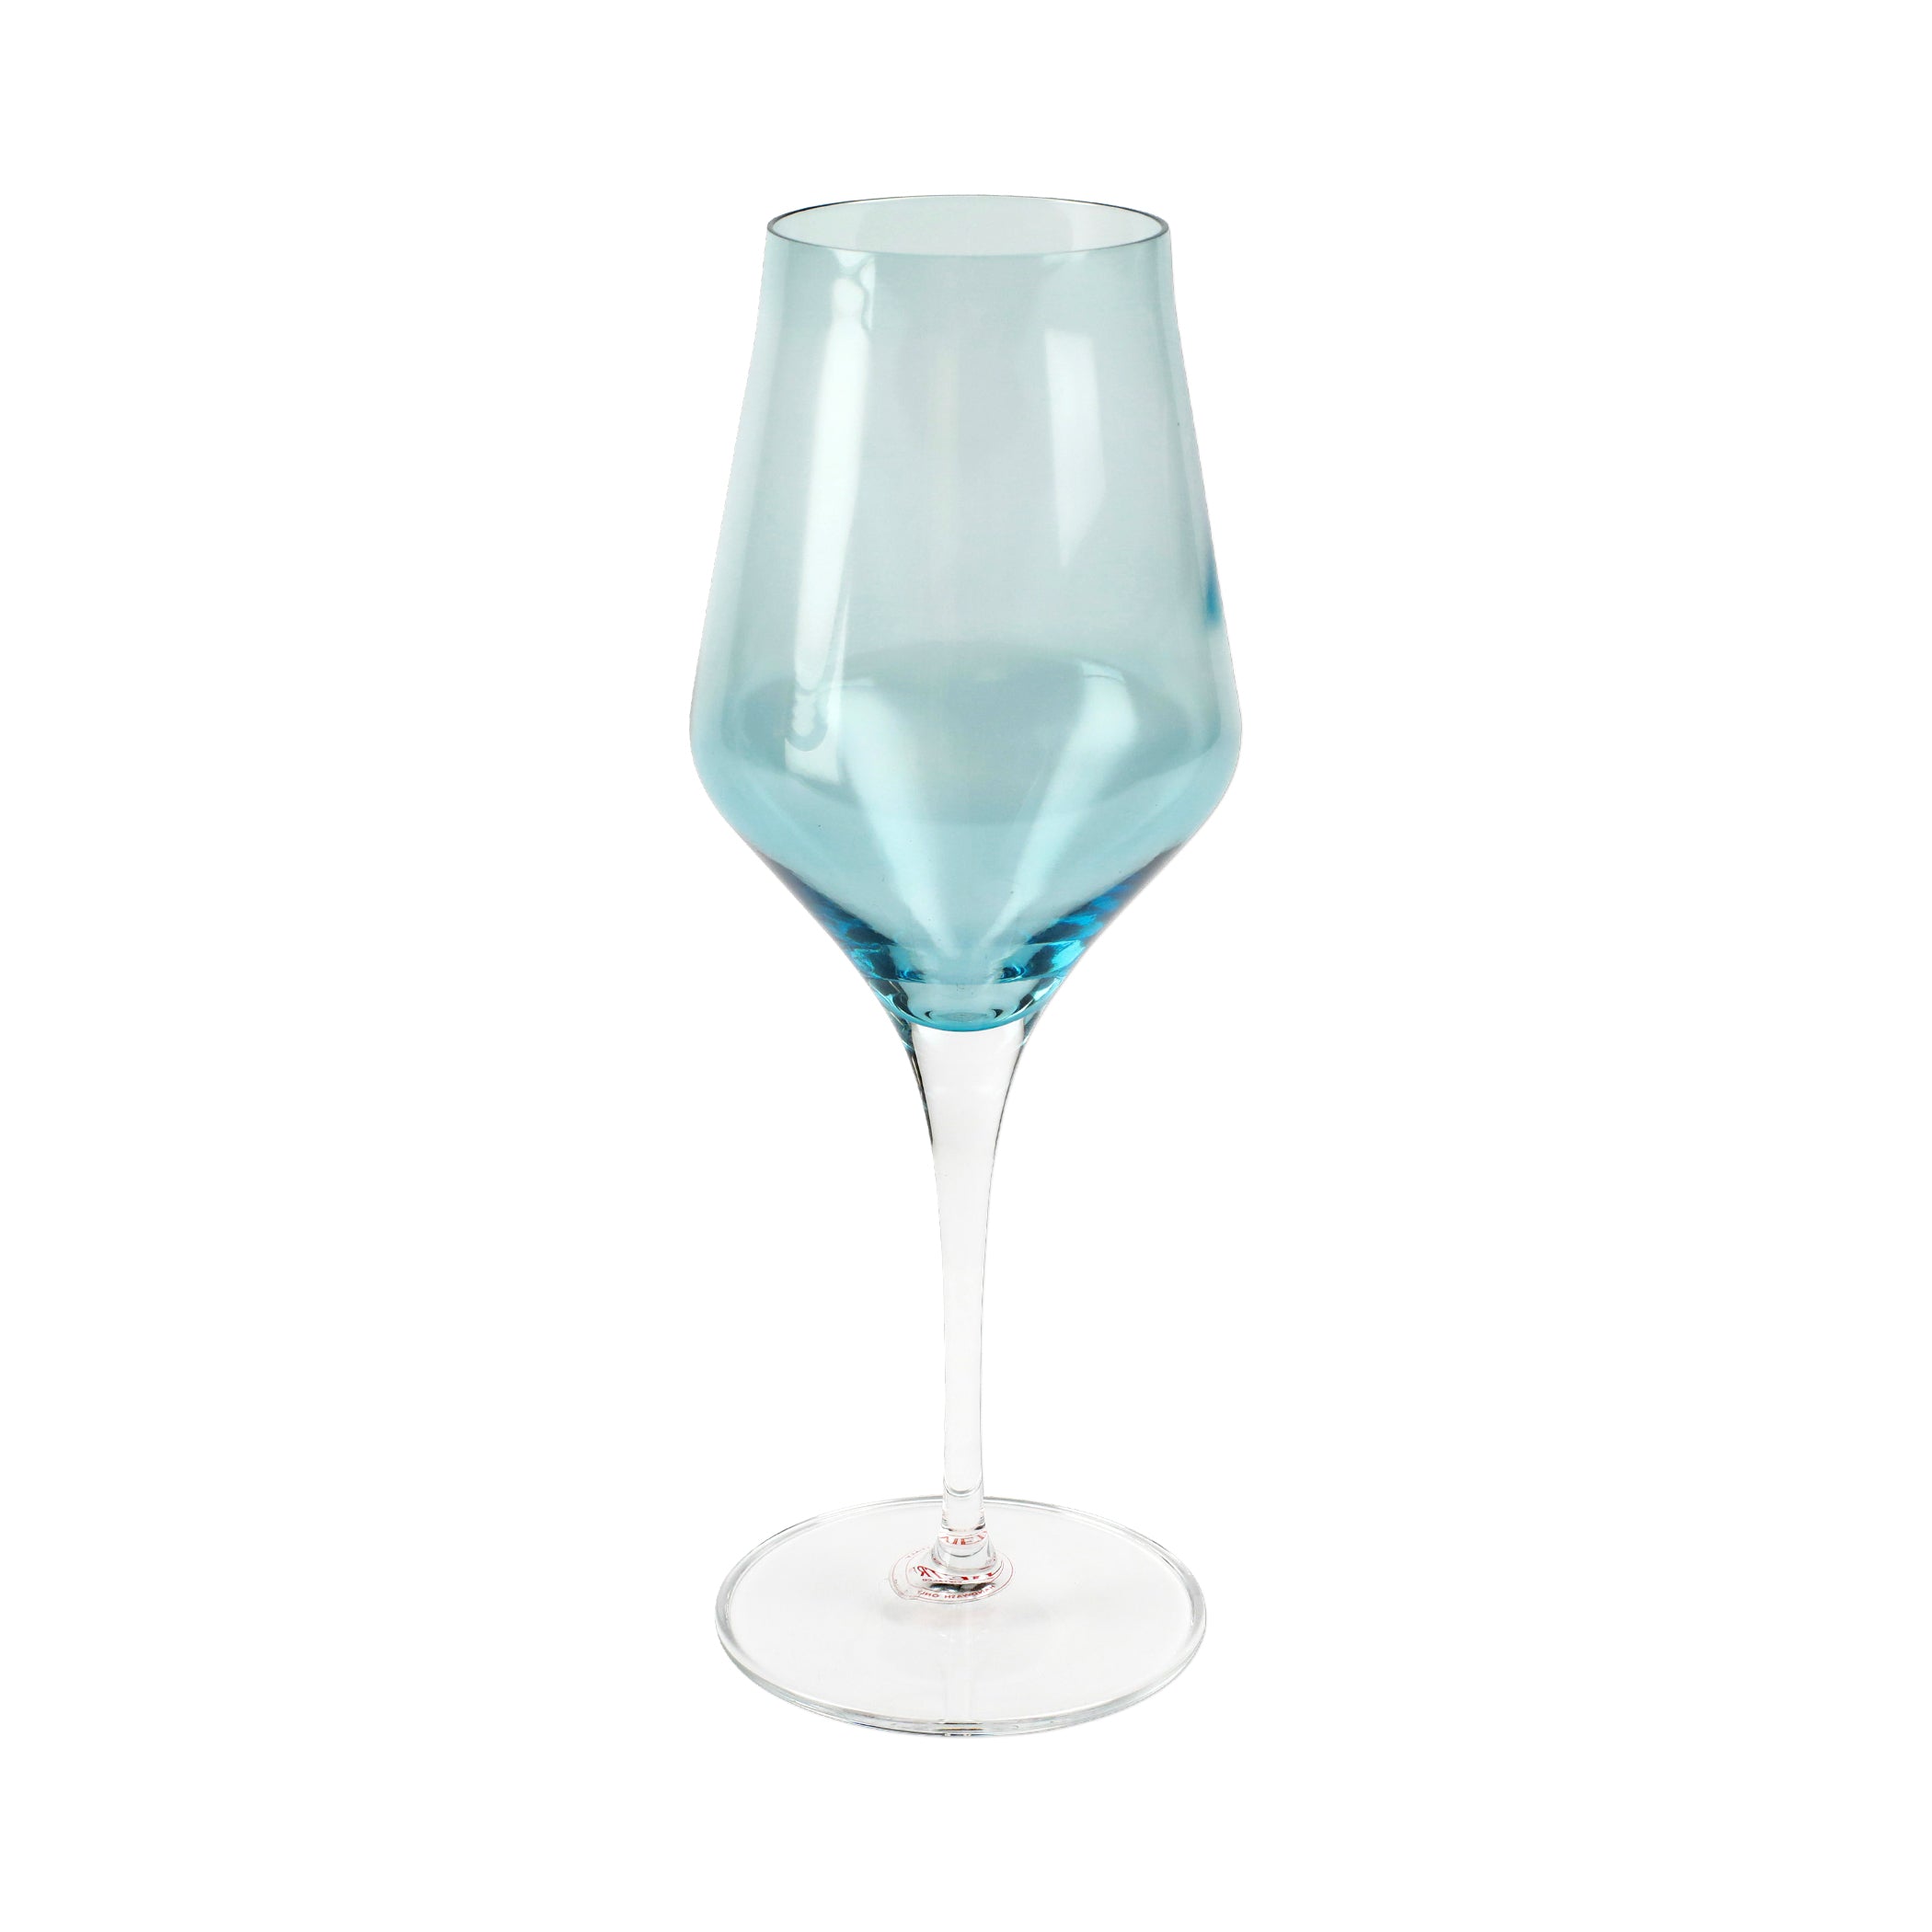 Contessa Teal Water Glass